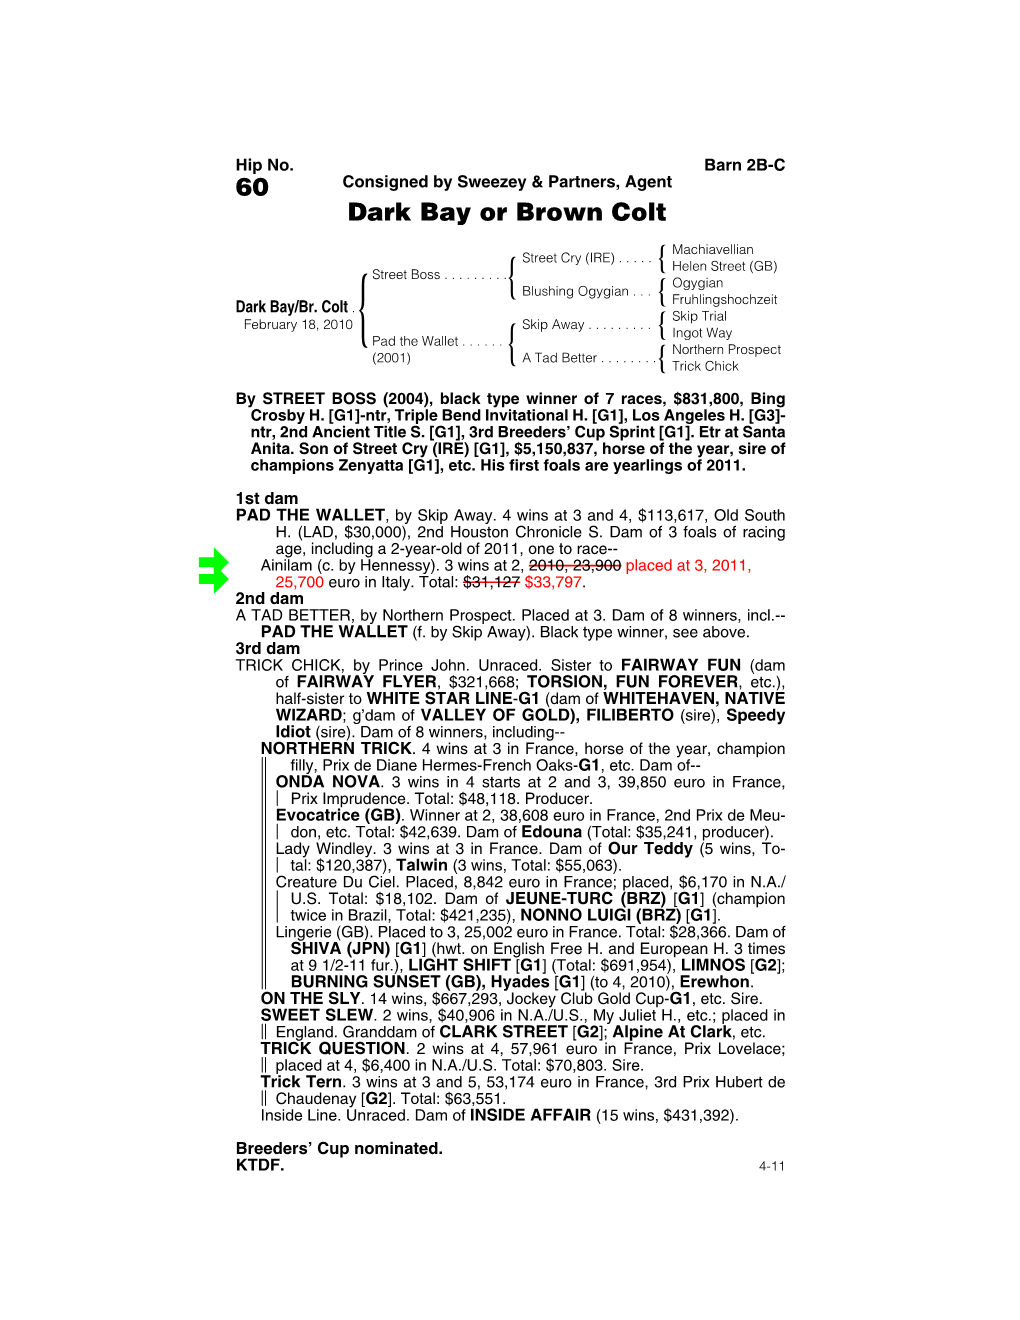 60 Consigned by Sweezey & Partners, Agent Dark Bay Or Brown Colt